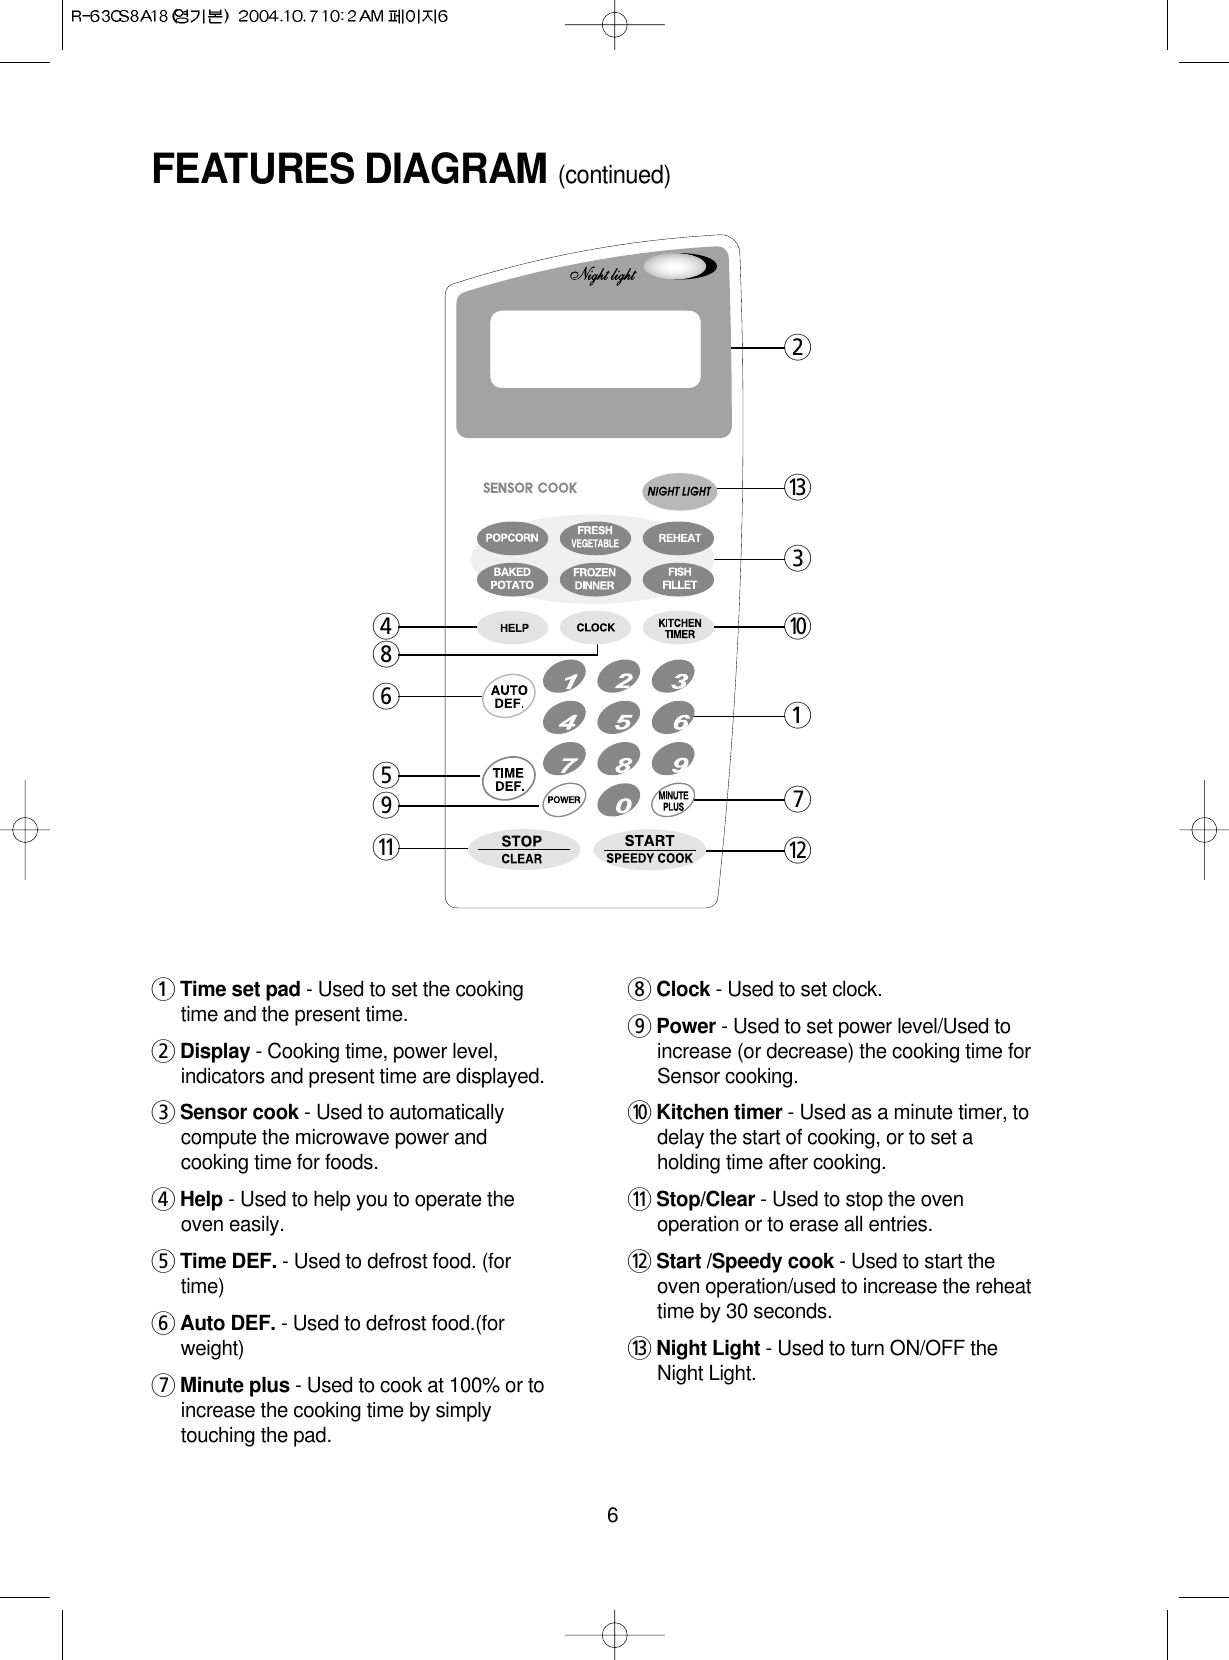 6FEATURES DIAGRAM (continued)465q9823e017w1Time set pad - Used to set the cookingtime and the present time.2Display - Cooking time, power level,indicators and present time are displayed.3Sensor cook - Used to automaticallycompute the microwave power andcooking time for foods. 4Help - Used to help you to operate theoven easily.5Time DEF. - Used to defrost food. (fortime)6Auto DEF. - Used to defrost food.(forweight)7Minute plus - Used to cook at 100% or toincrease the cooking time by simplytouching the pad.8Clock - Used to set clock.9Power - Used to set power level/Used toincrease (or decrease) the cooking time forSensor cooking.0Kitchen timer - Used as a minute timer, todelay the start of cooking, or to set aholding time after cooking.qStop/Clear - Used to stop the ovenoperation or to erase all entries.wStart /Speedy cook - Used to start theoven operation/used to increase the reheattime by 30 seconds. eNight Light - Used to turn ON/OFF theNight Light.